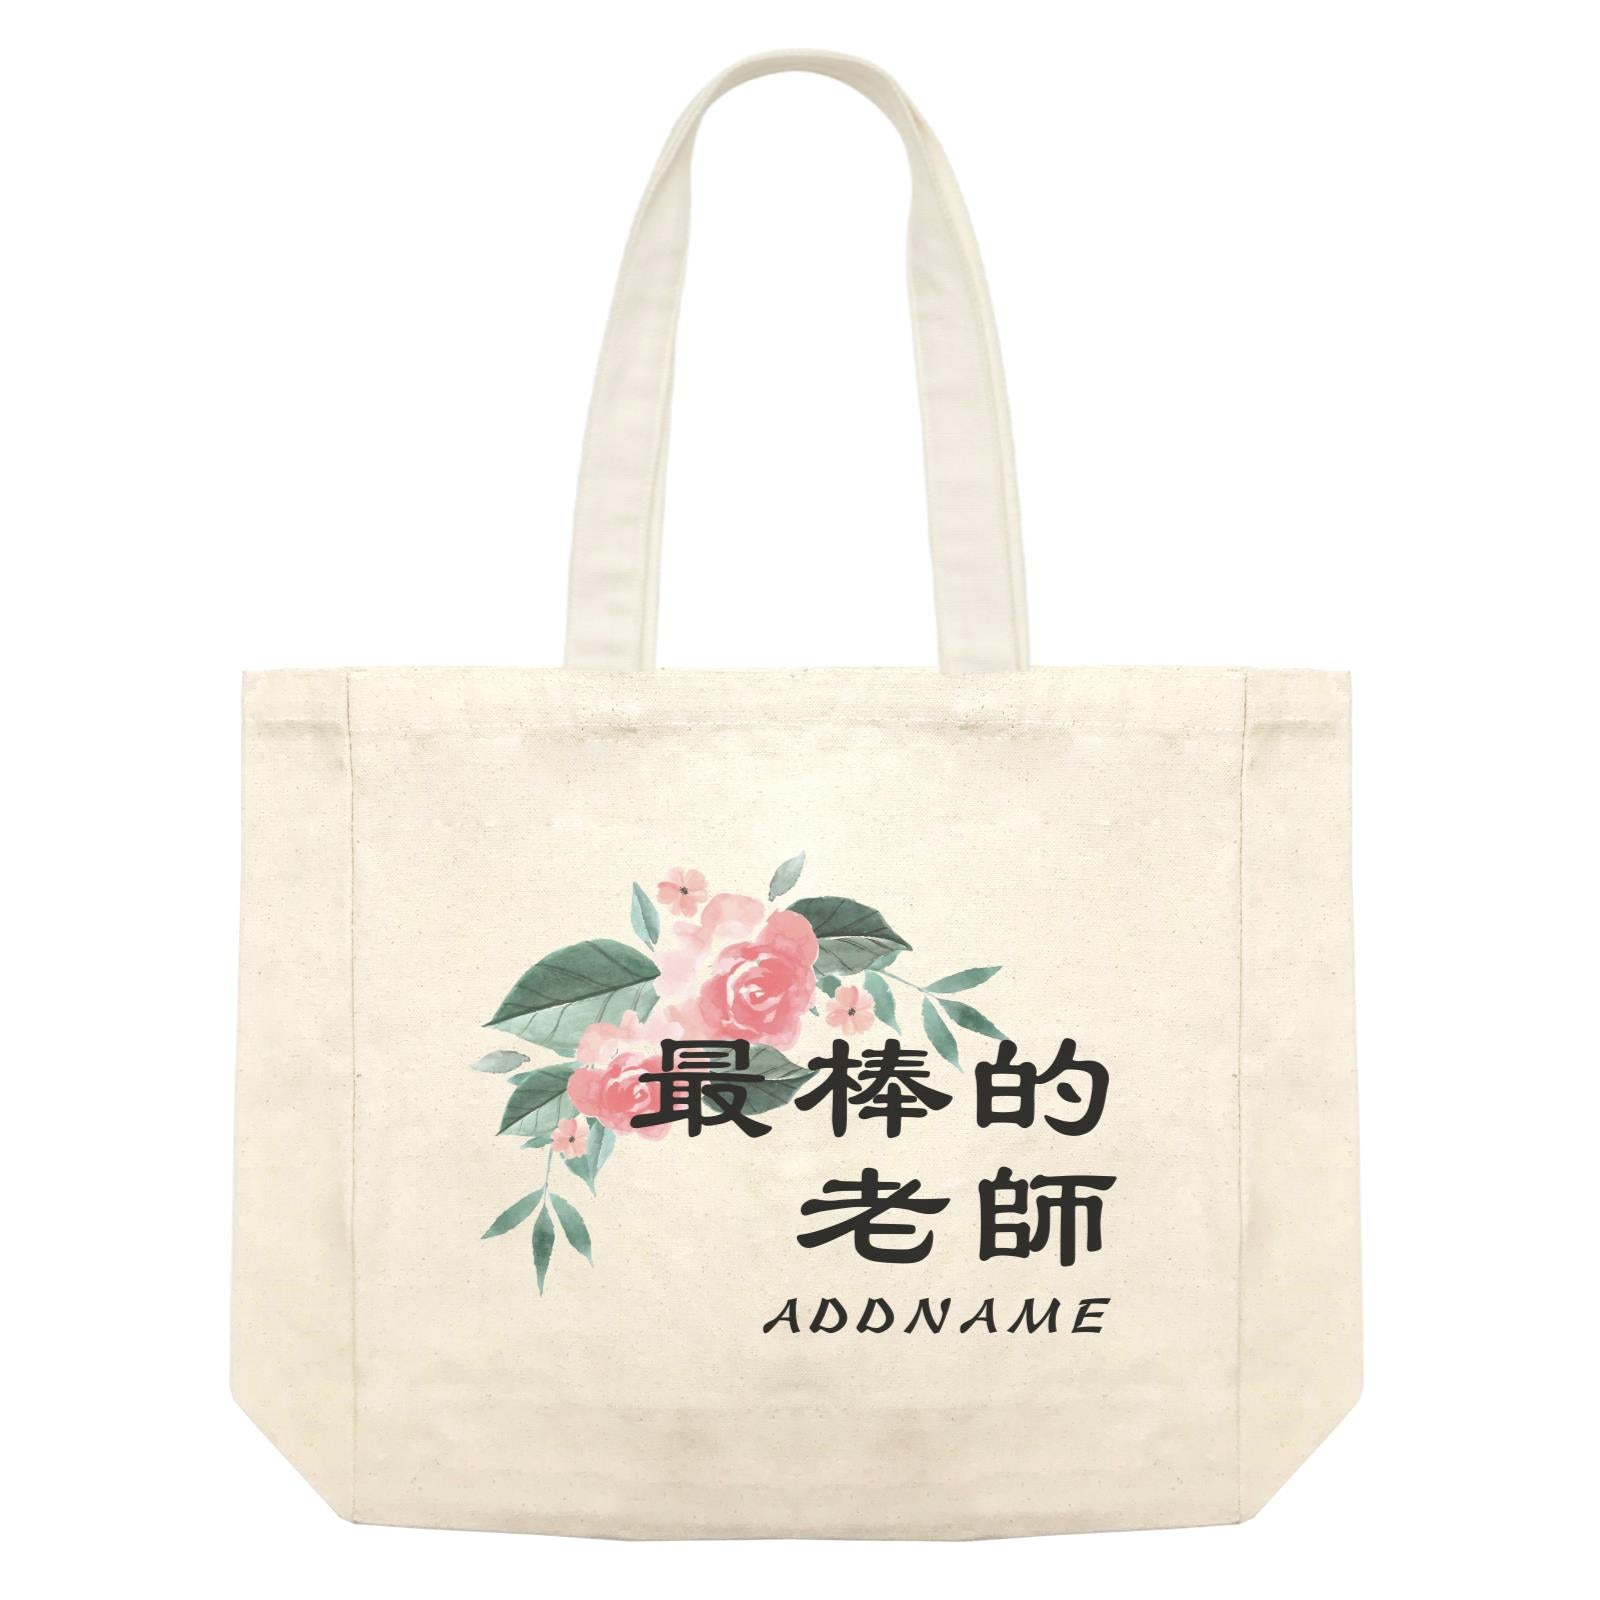 Watercolour Best Teacher Chinese Addname Shopping Bag